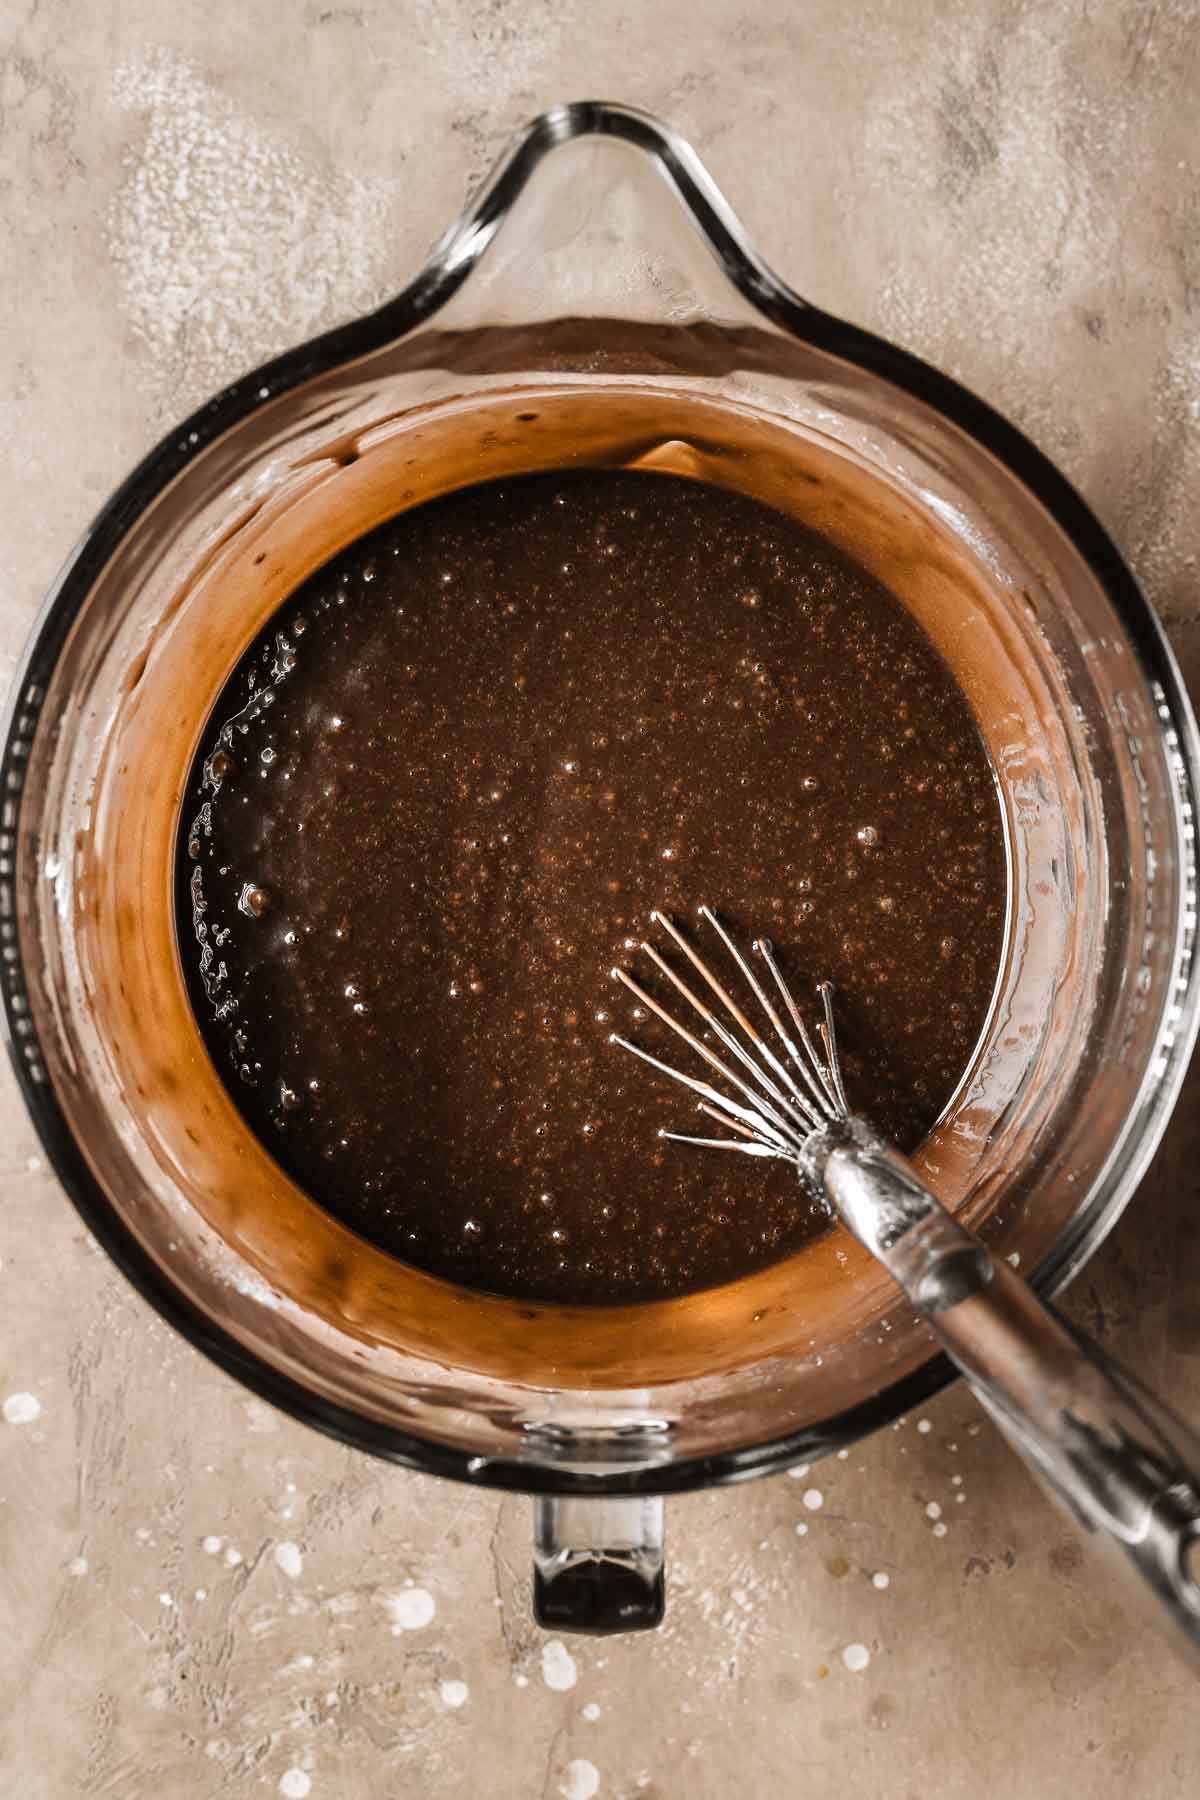 A glass mixing bowl filled with chocolate cake batter.